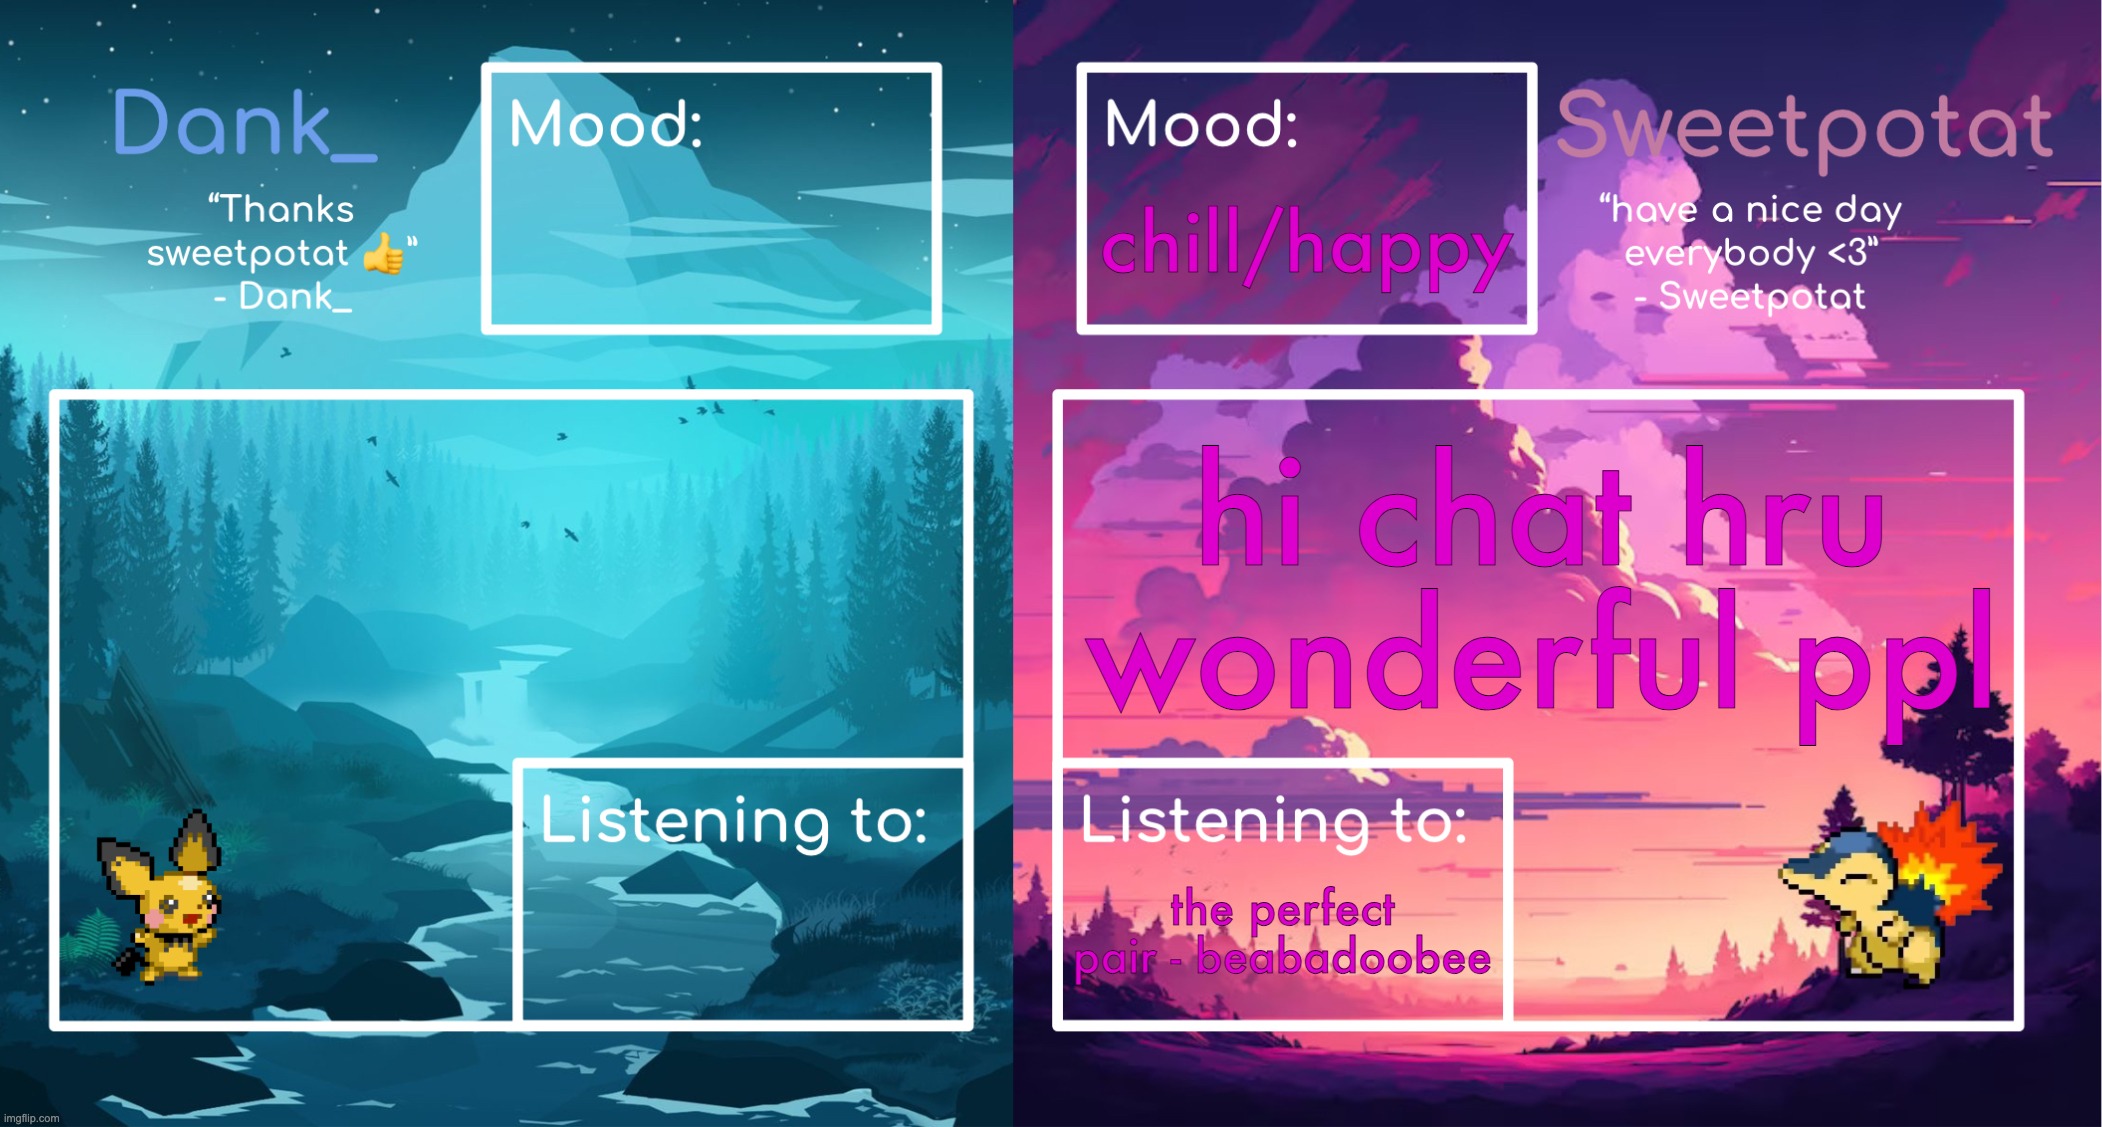 istg beabadoobee is so amazing all of her songs are so good | chill/happy; hi chat hru wonderful ppl; the perfect pair - beabadoobee | image tagged in dank and sweetpotat shared temp | made w/ Imgflip meme maker